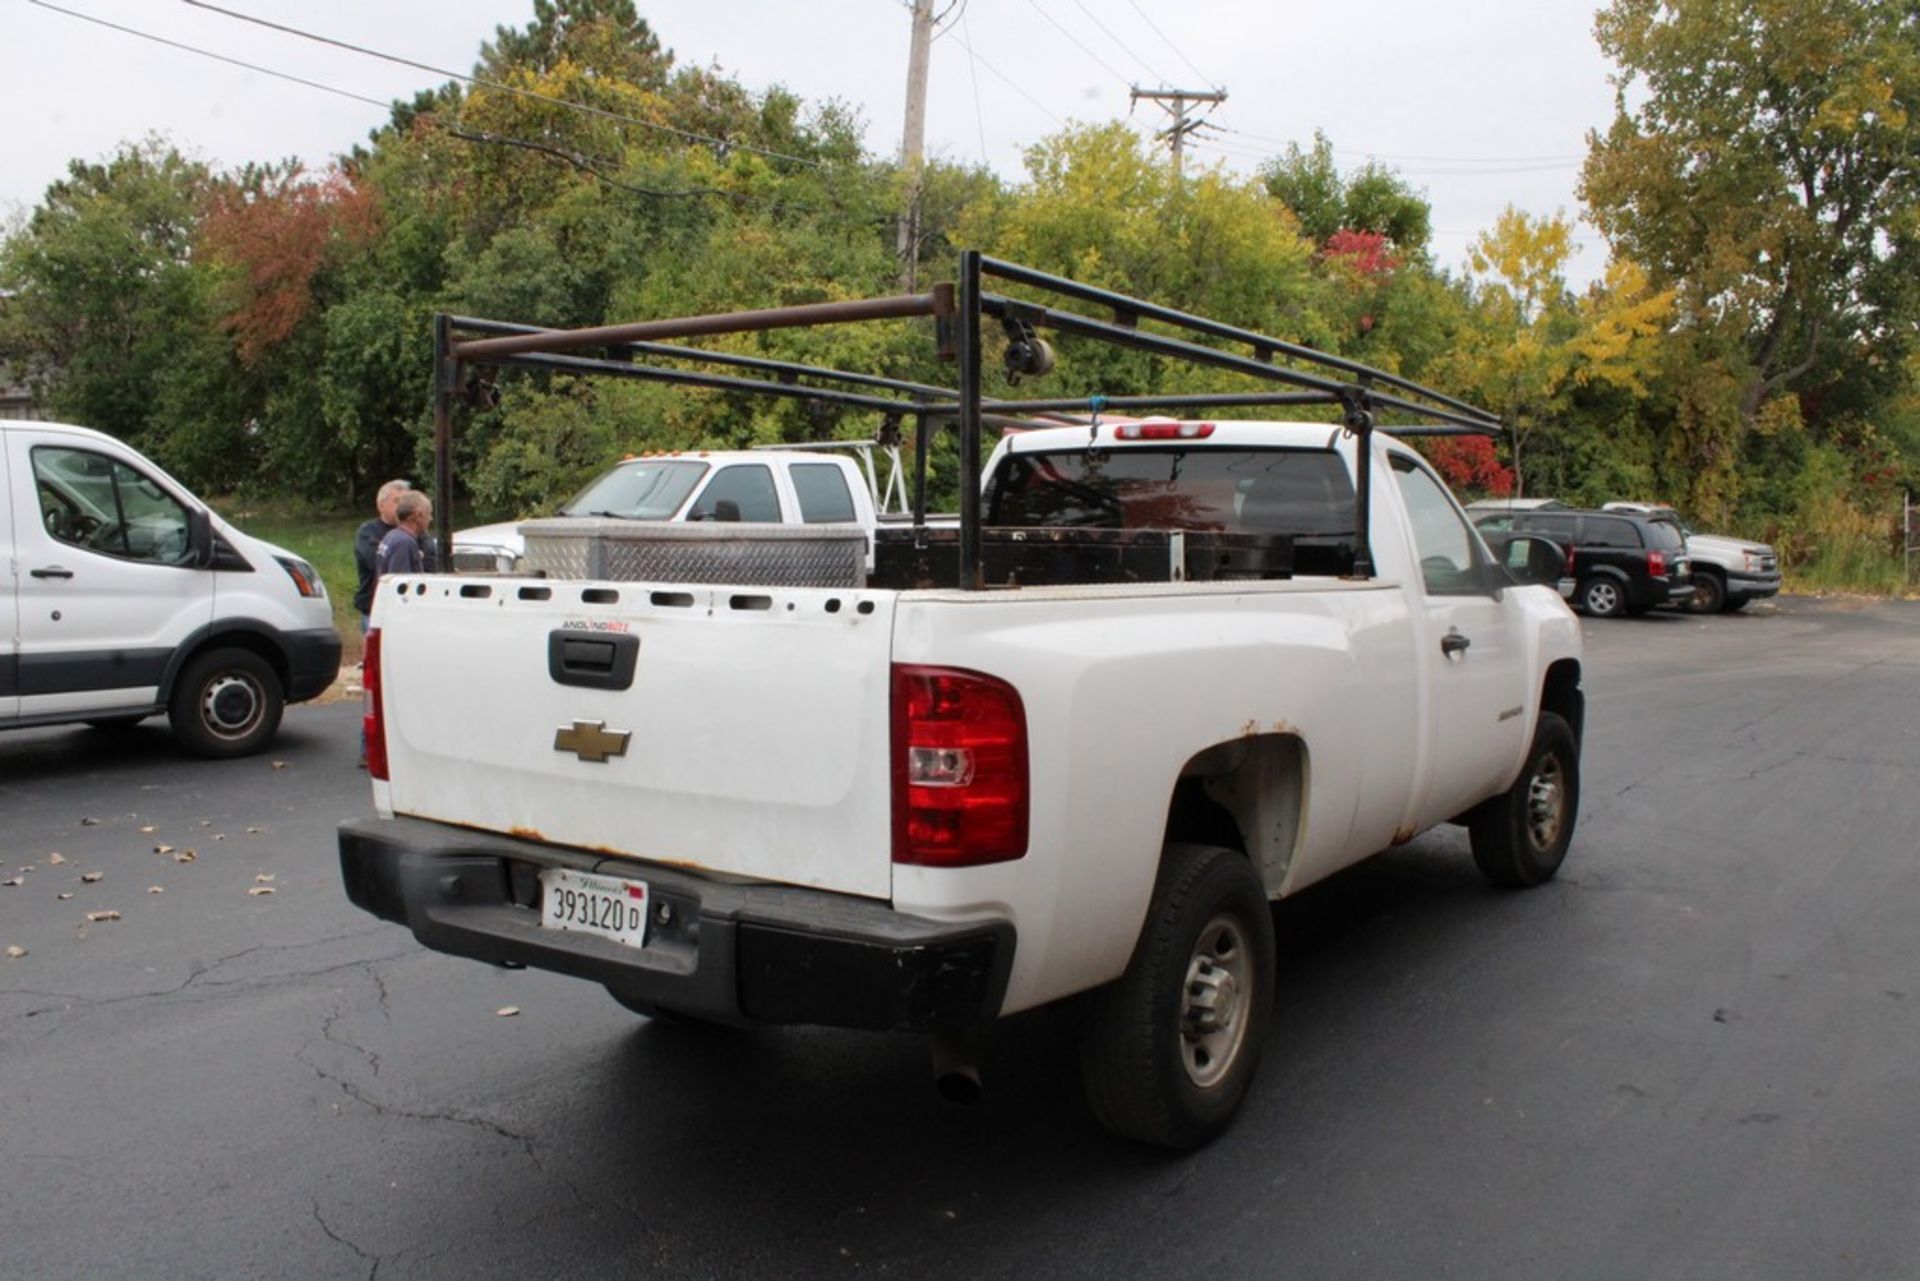 2007 CHEVROLET 2500HD STANDARD CAB PICKUP TRUCK, WITH LADDER RACK, DIAMOND PLATE TOOL BOX AND JOB - Image 4 of 10